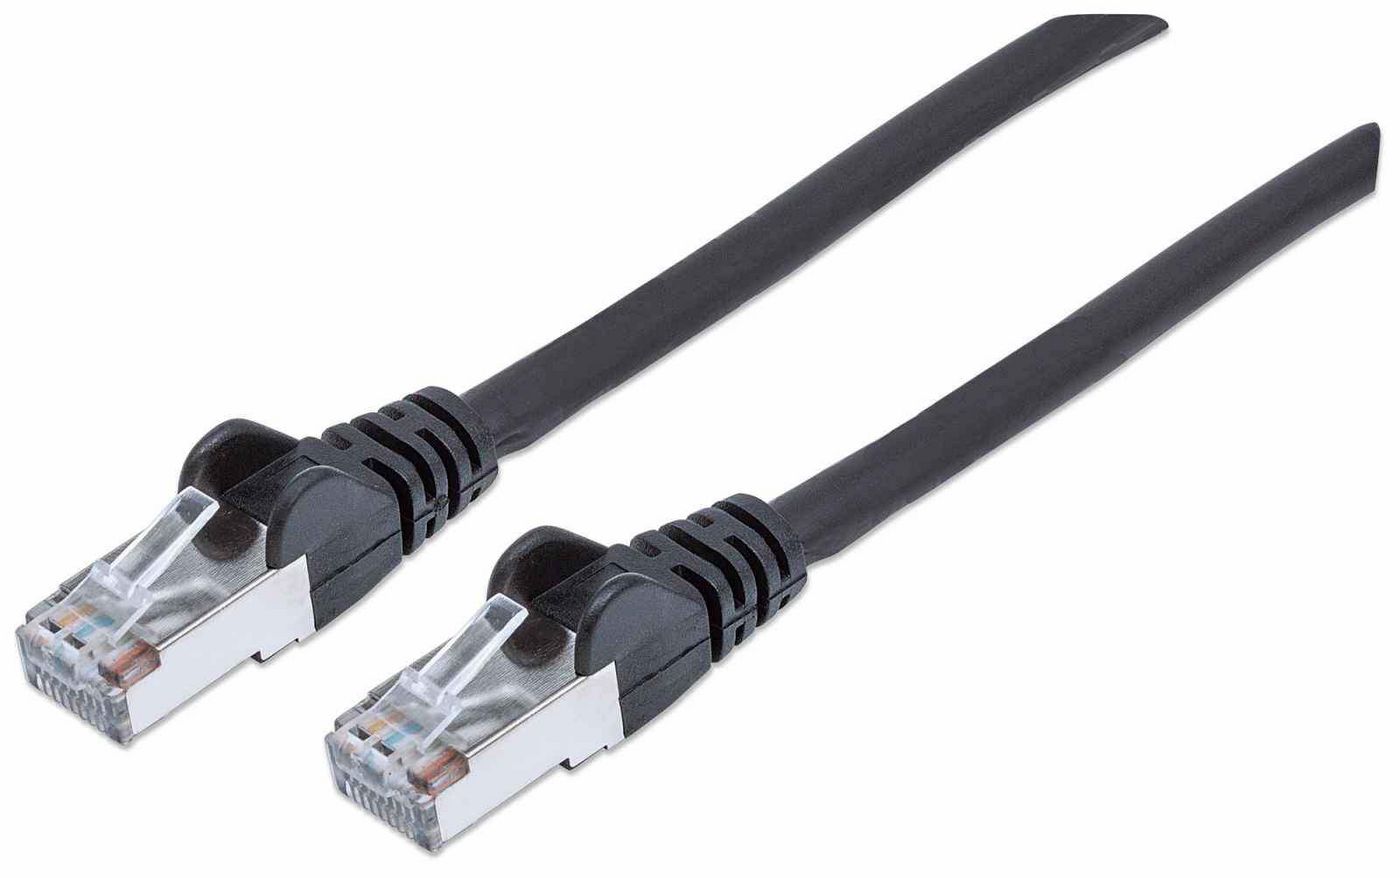 Intellinet 740999 High Performance Network Cable 